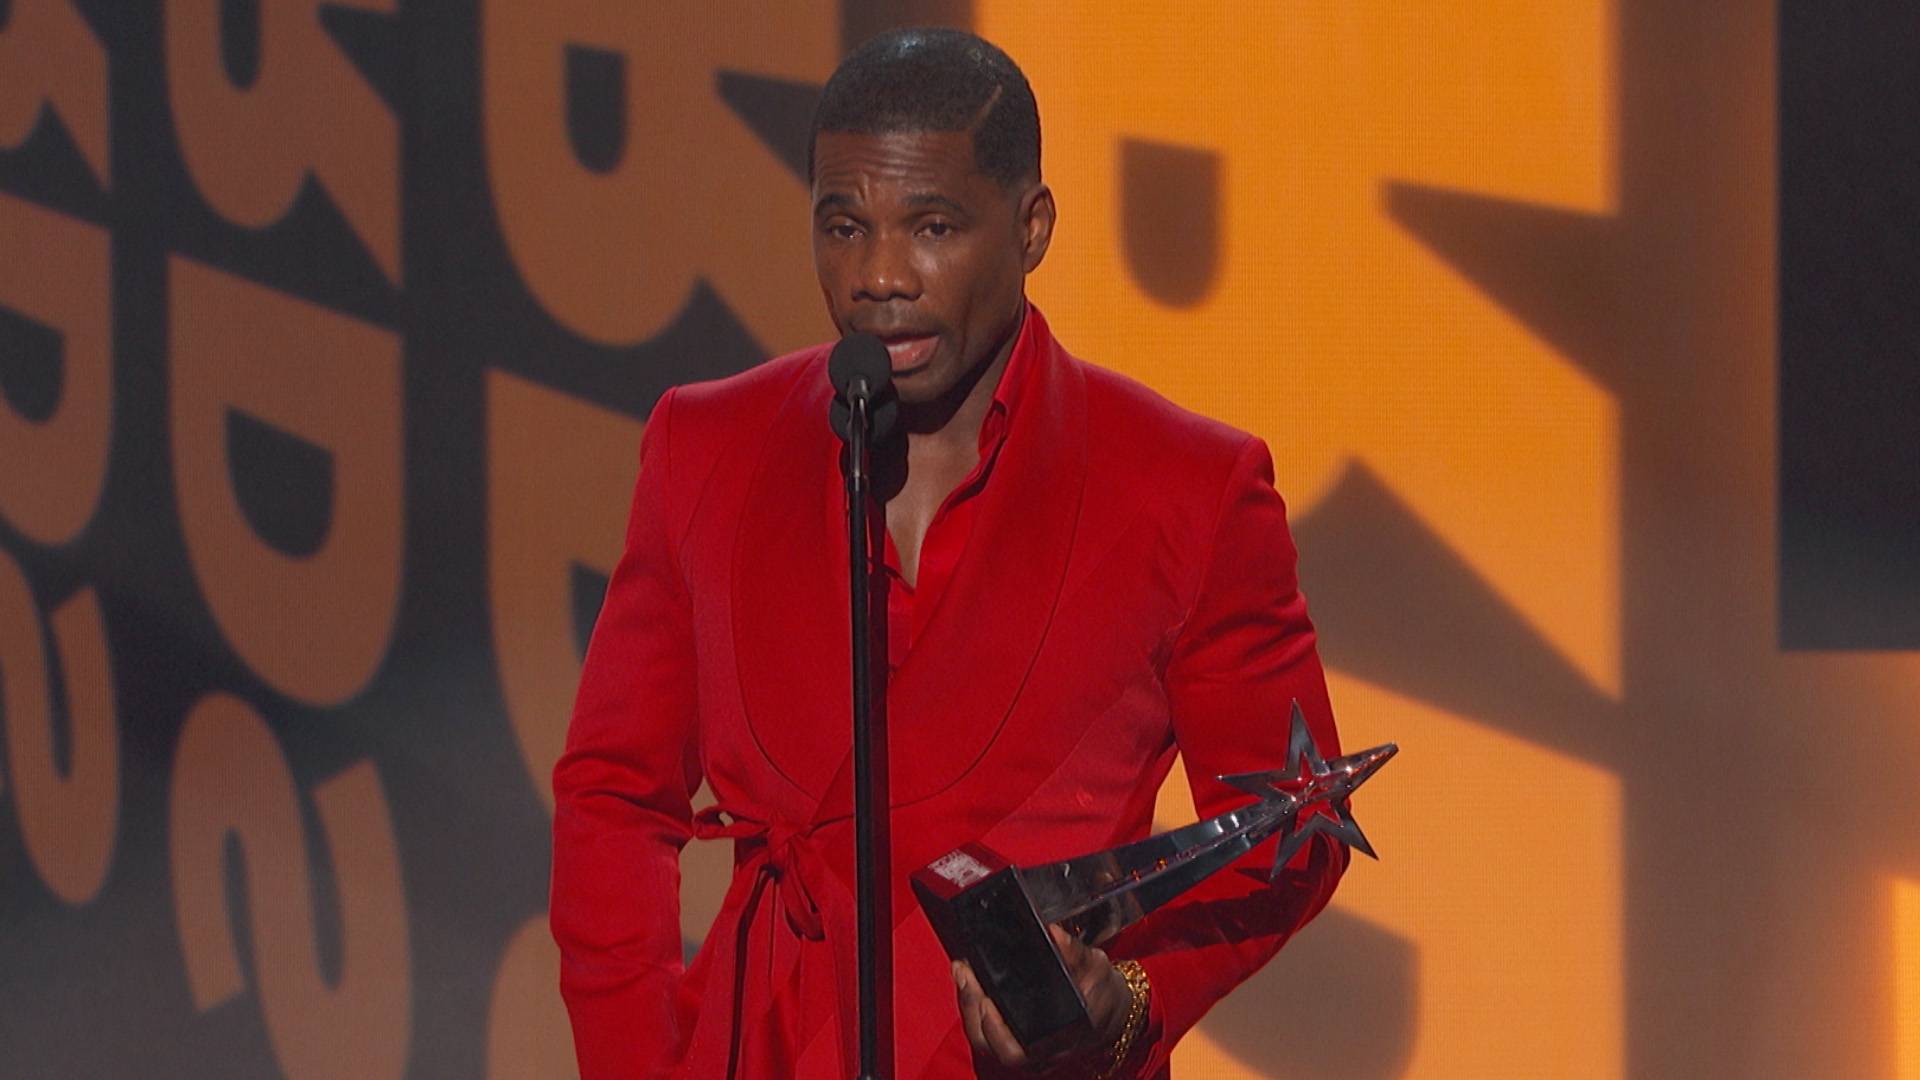 Kirk Franklin's acceptance speech at the BET Awards.